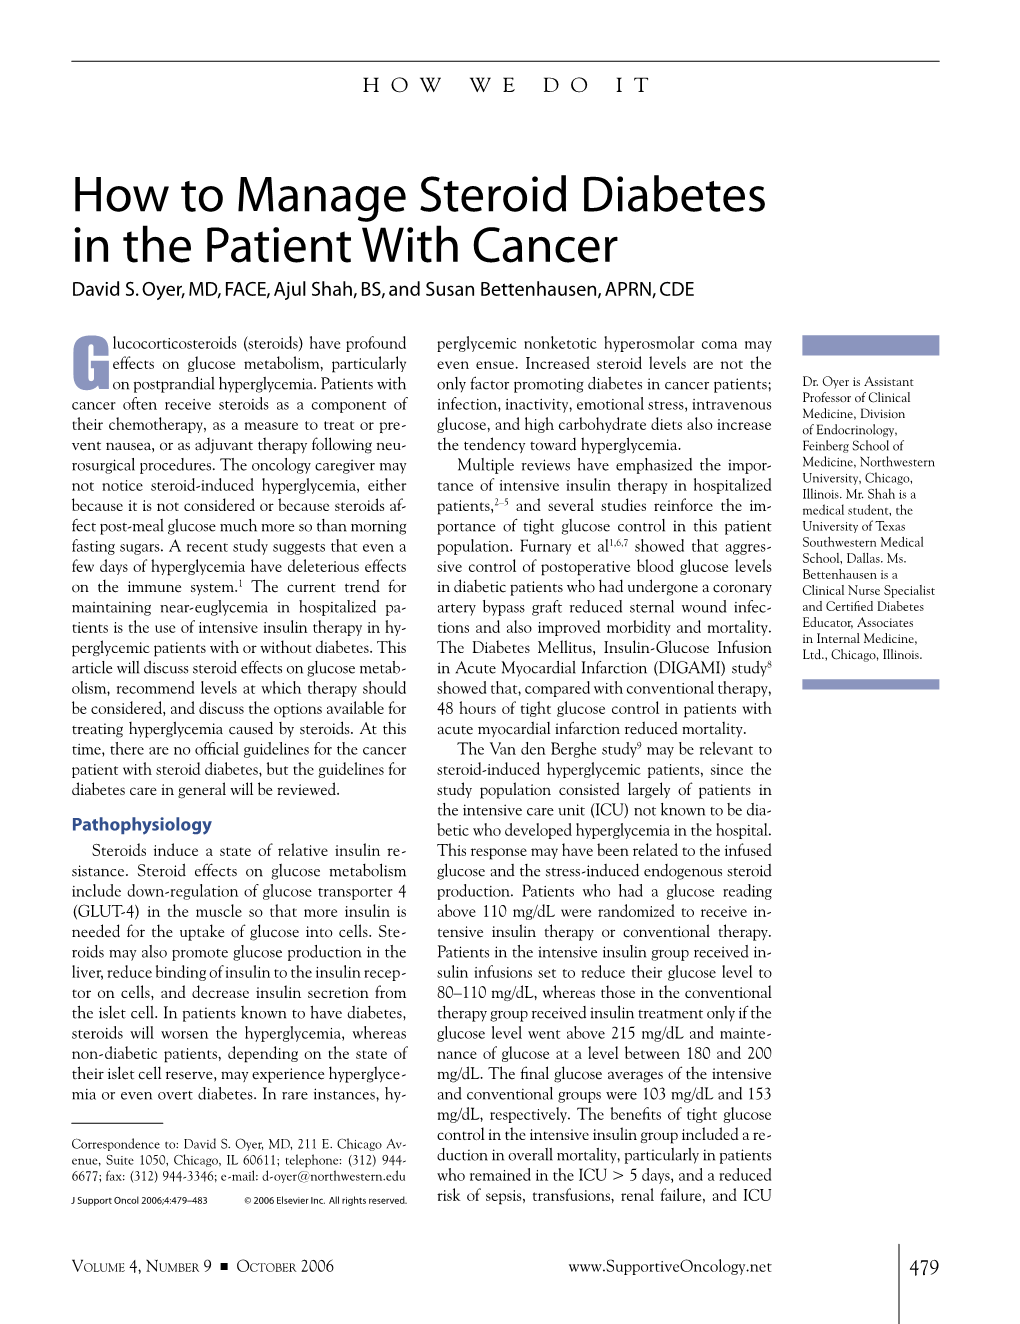 How to Manage Steroid Diabetes in the Patient with Cancer David S